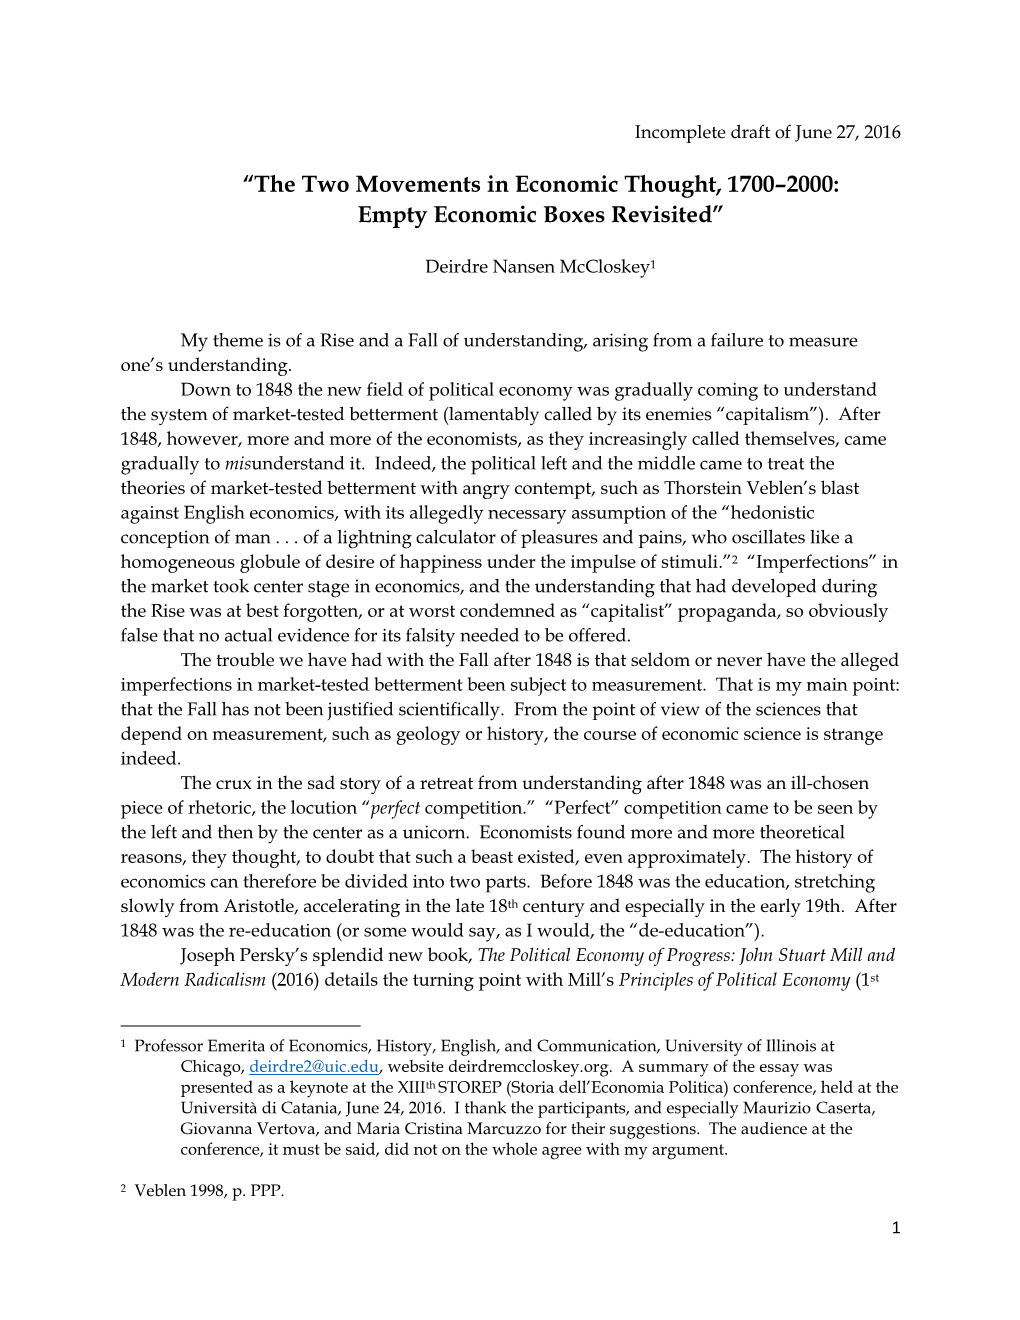 “The Two Movements in Economic Thought, 1700–2000: Empty Economic Boxes Revisited”